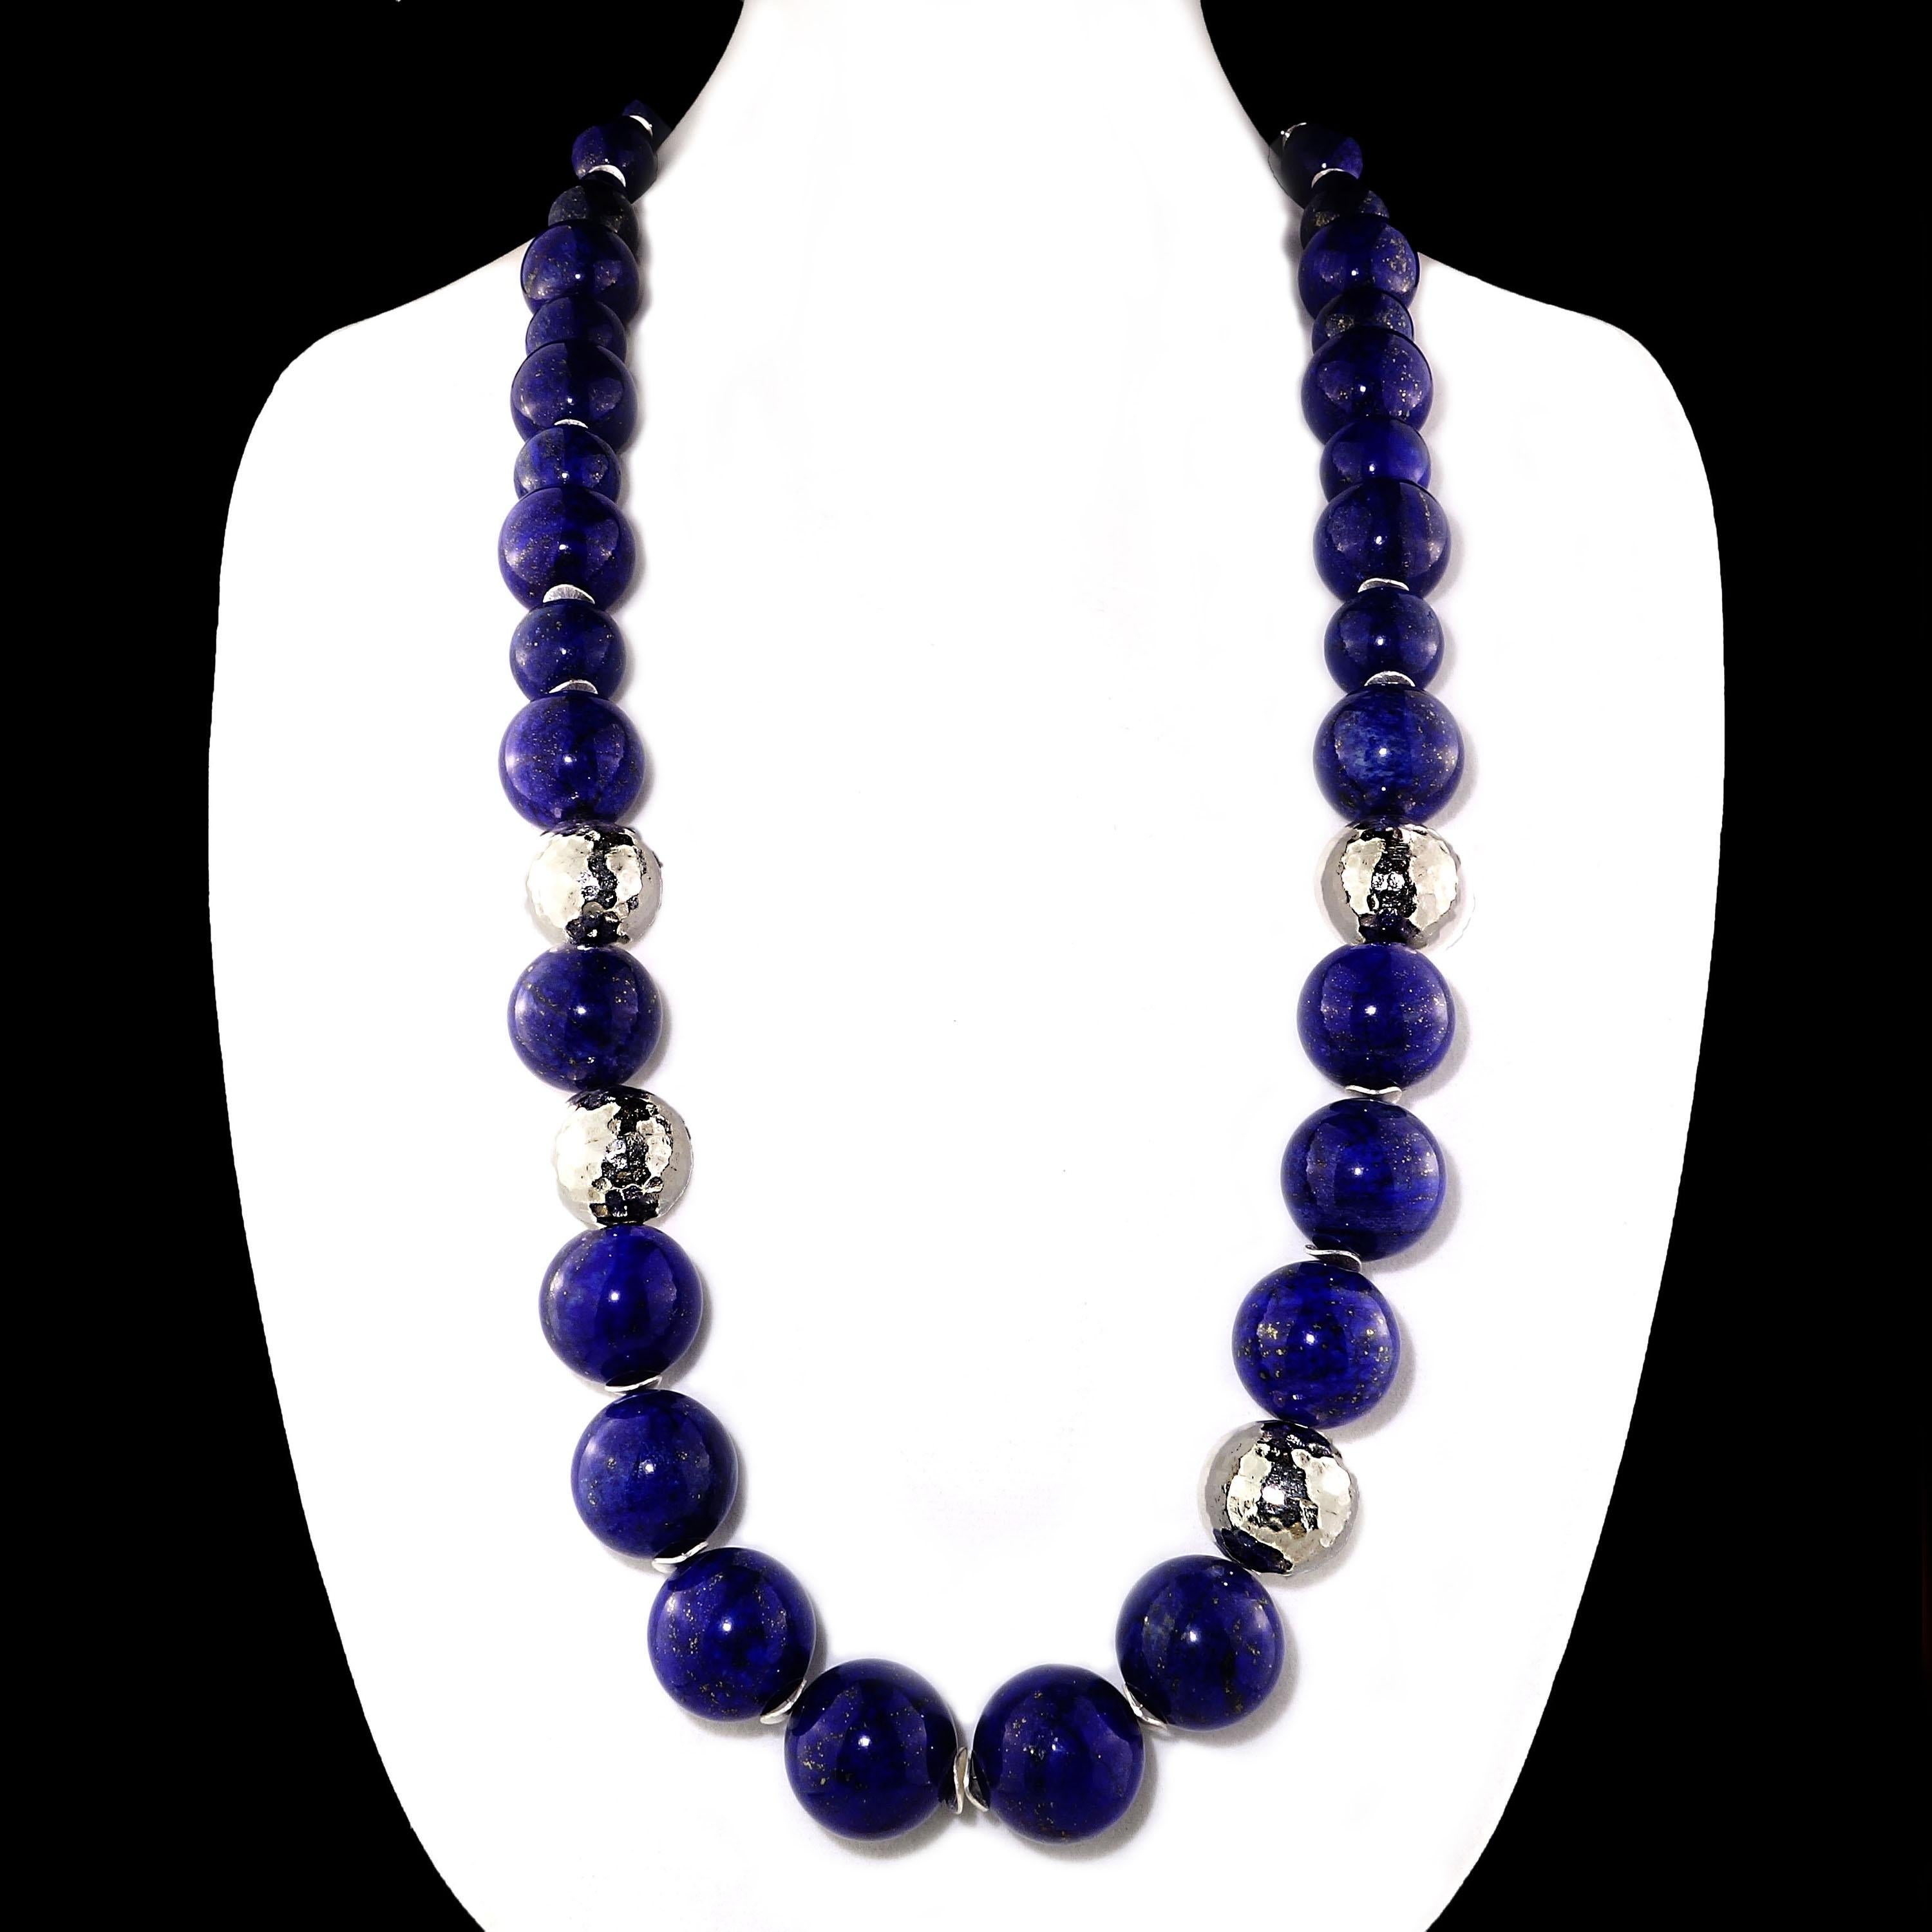 Fabulous 36 inch custom made necklace in Lapis Lazuli with four  pure Silver accents.  This one of a kind necklace features gorgeous Lapis Lazuli in three sizes, 22MM, 18MM, and 10MM, with accents of 20MM faceted pure Silver.  Silver tone flutters